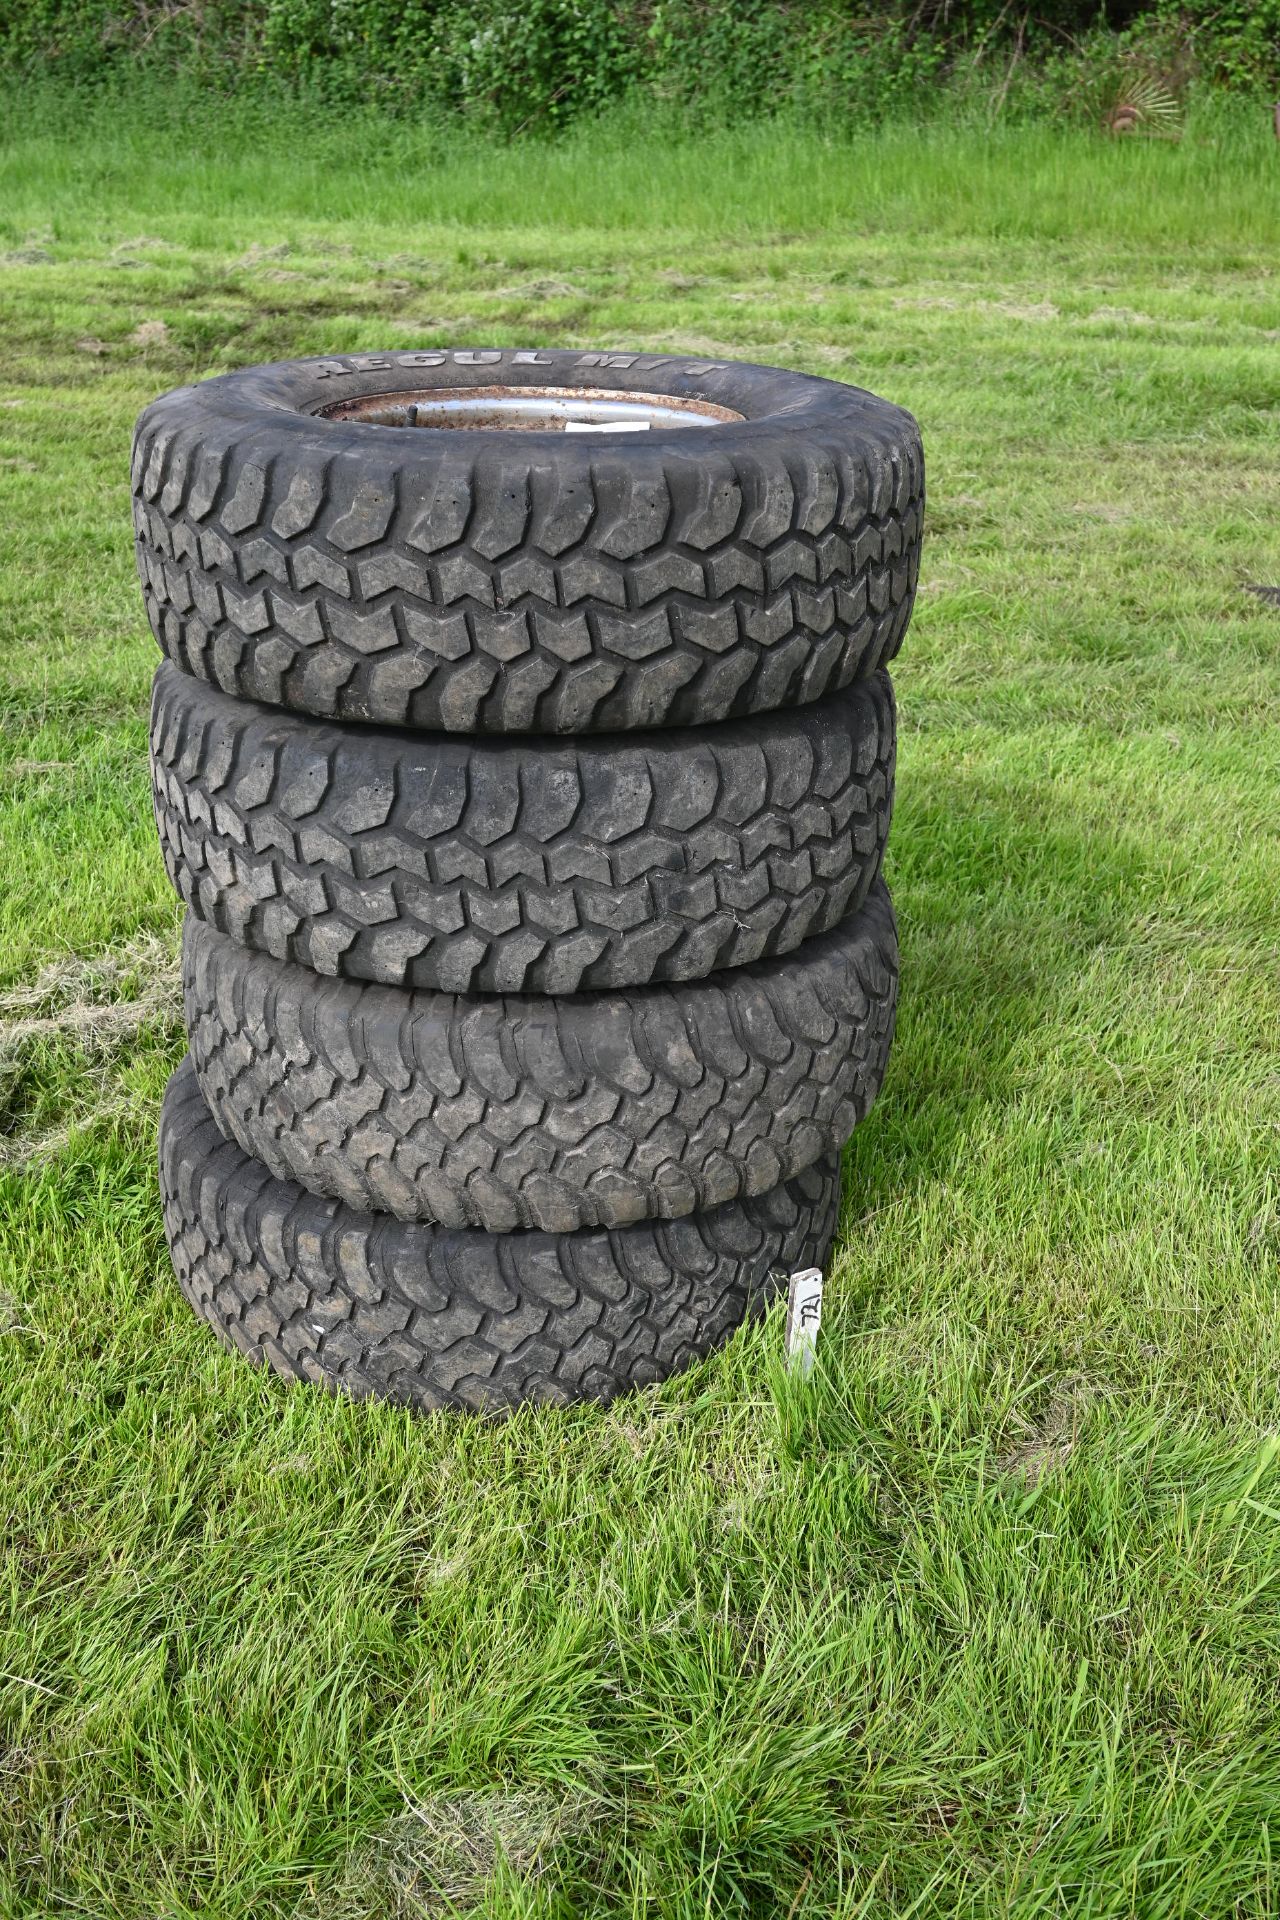 4x 285 75 R16 tyres on rims to fit Landrover Defender